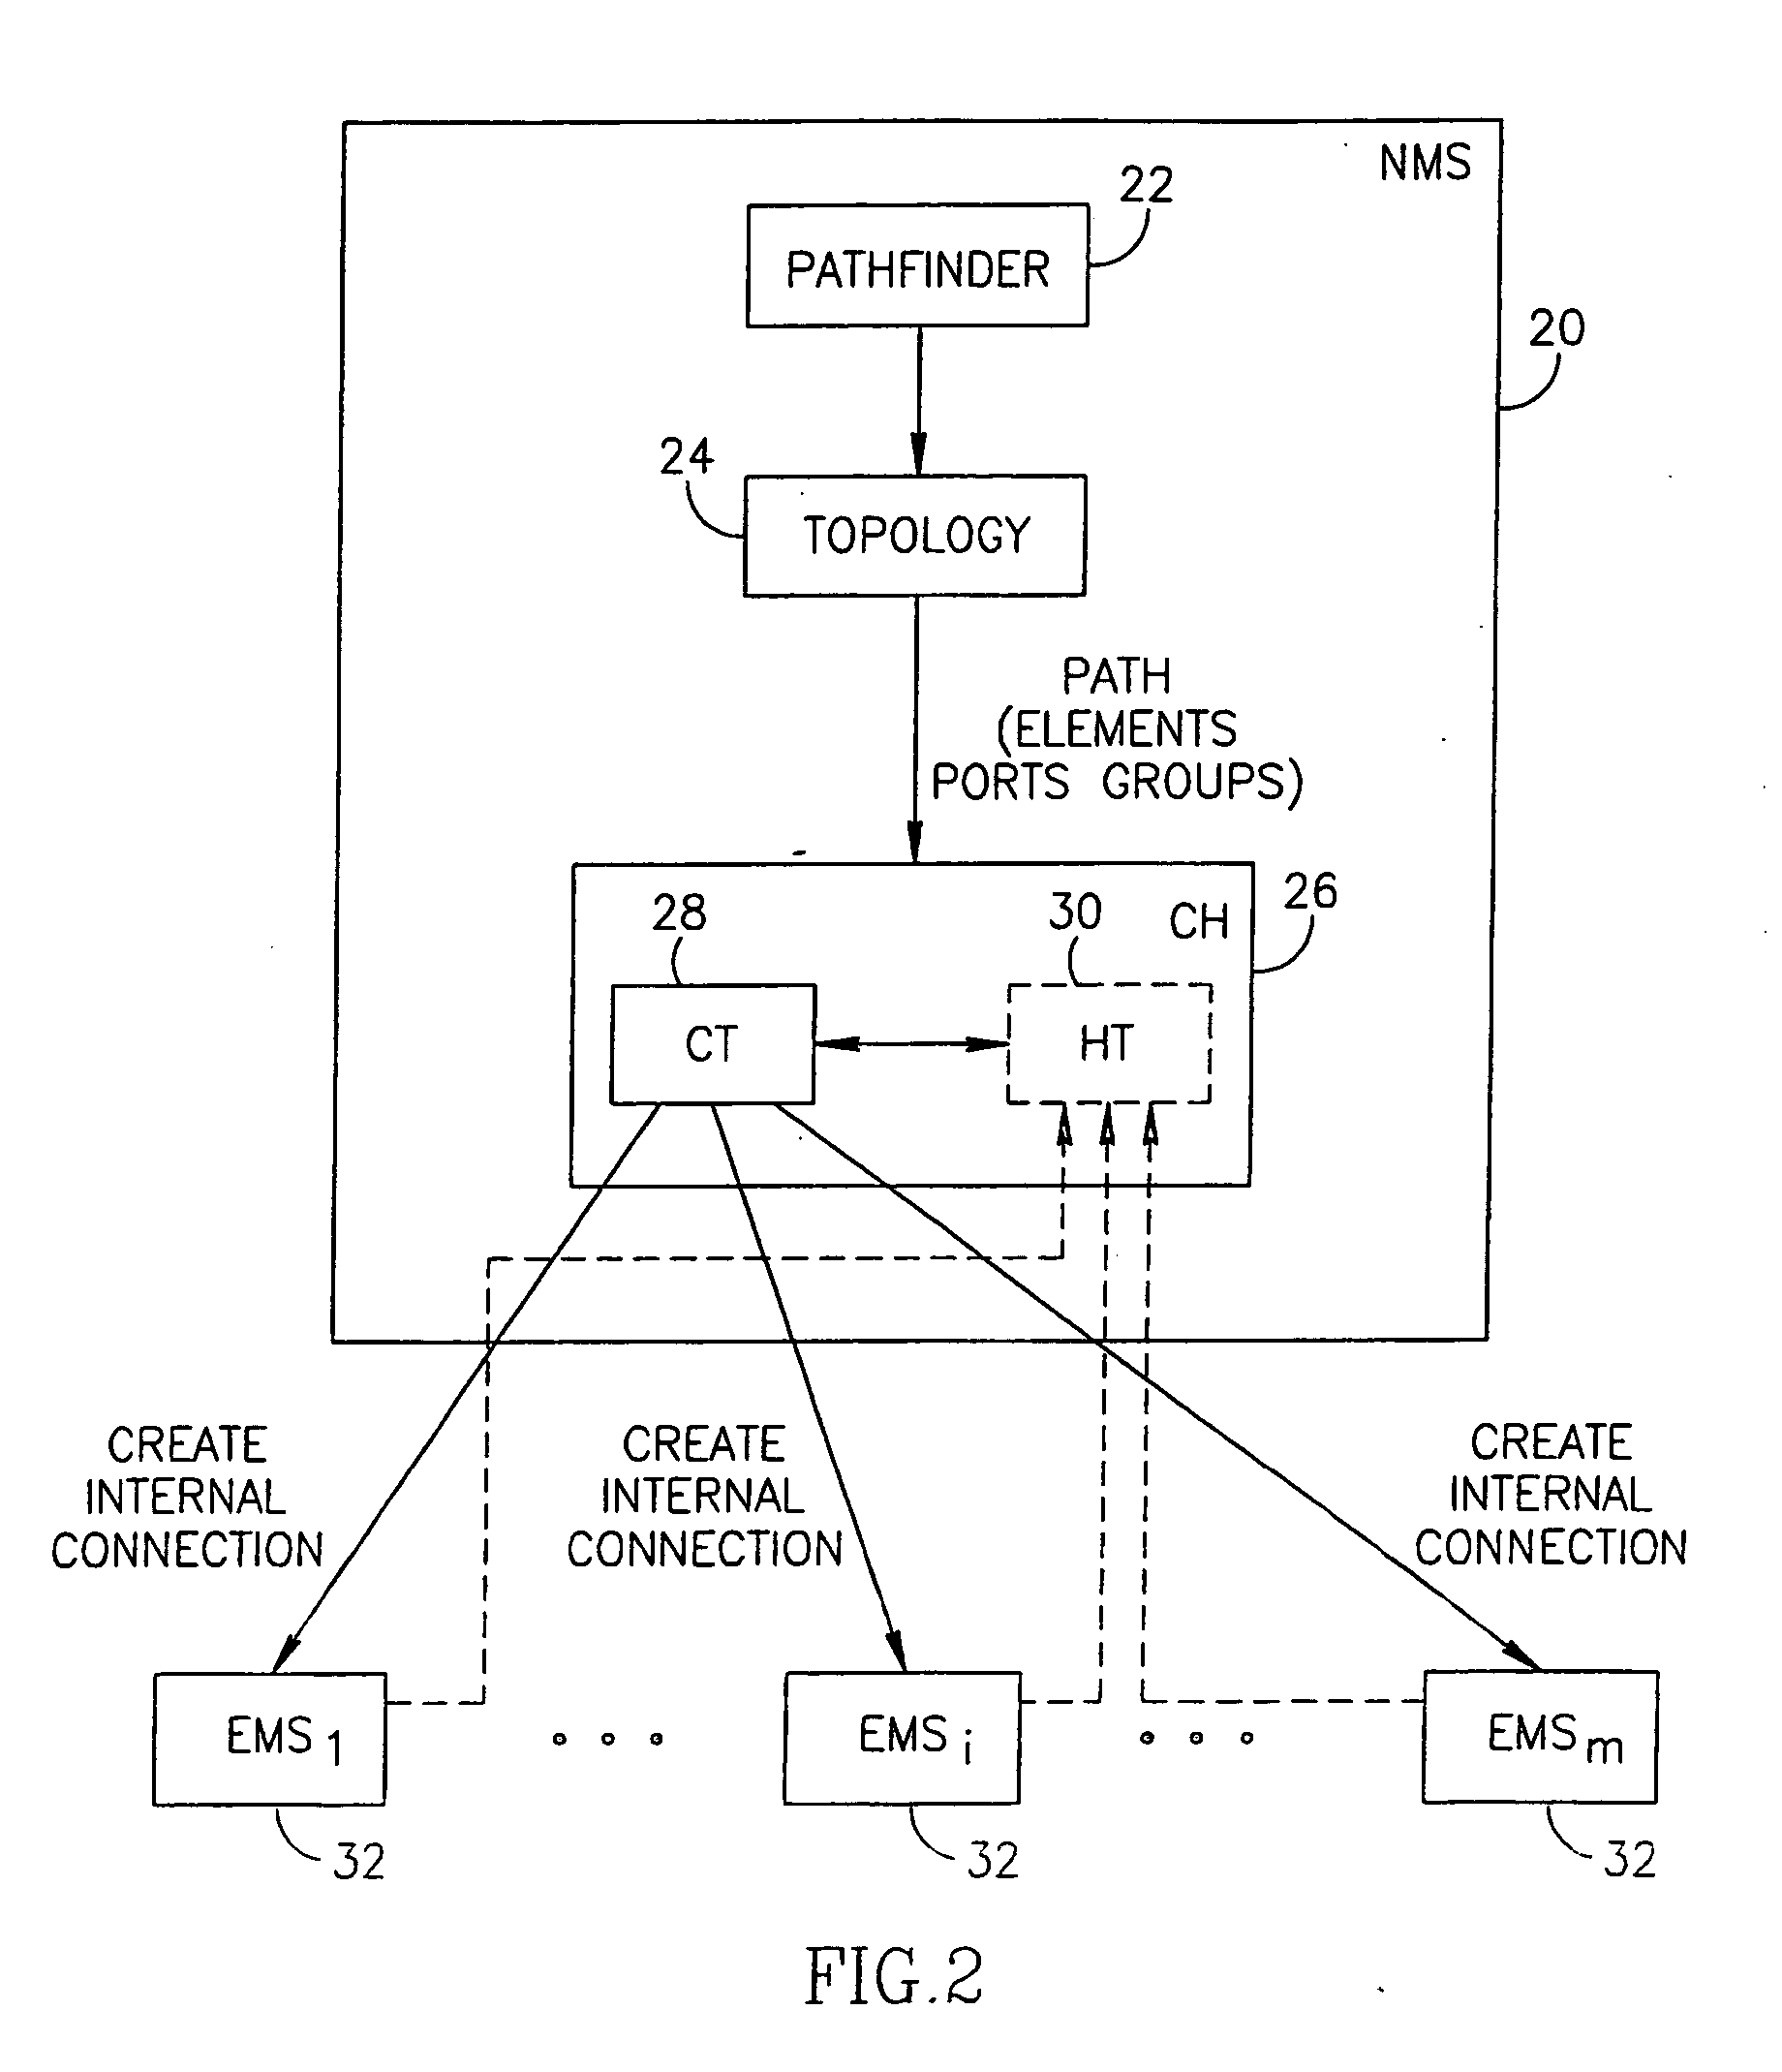 Technique of determining connectivity solutions for network elements